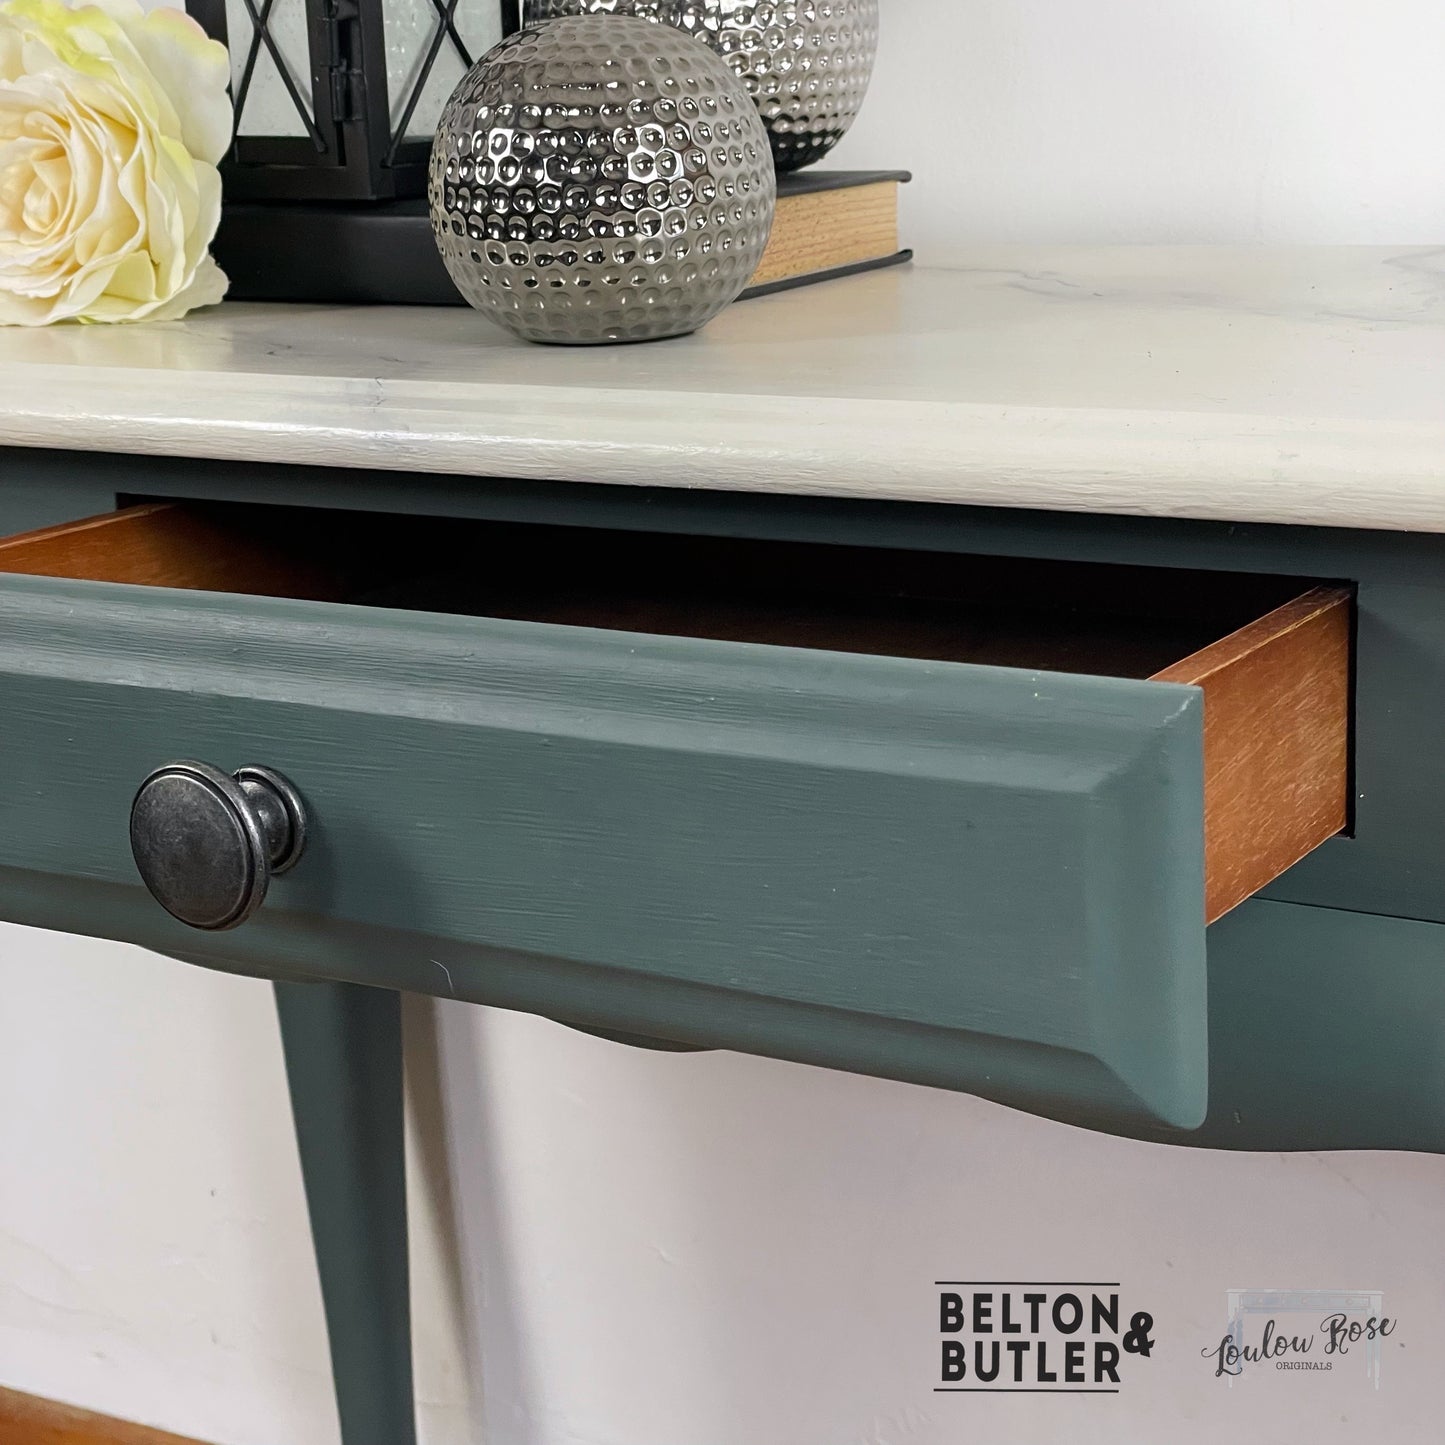 Console Table in Green with Faux Marble Top and Carved Queen Anne Legs